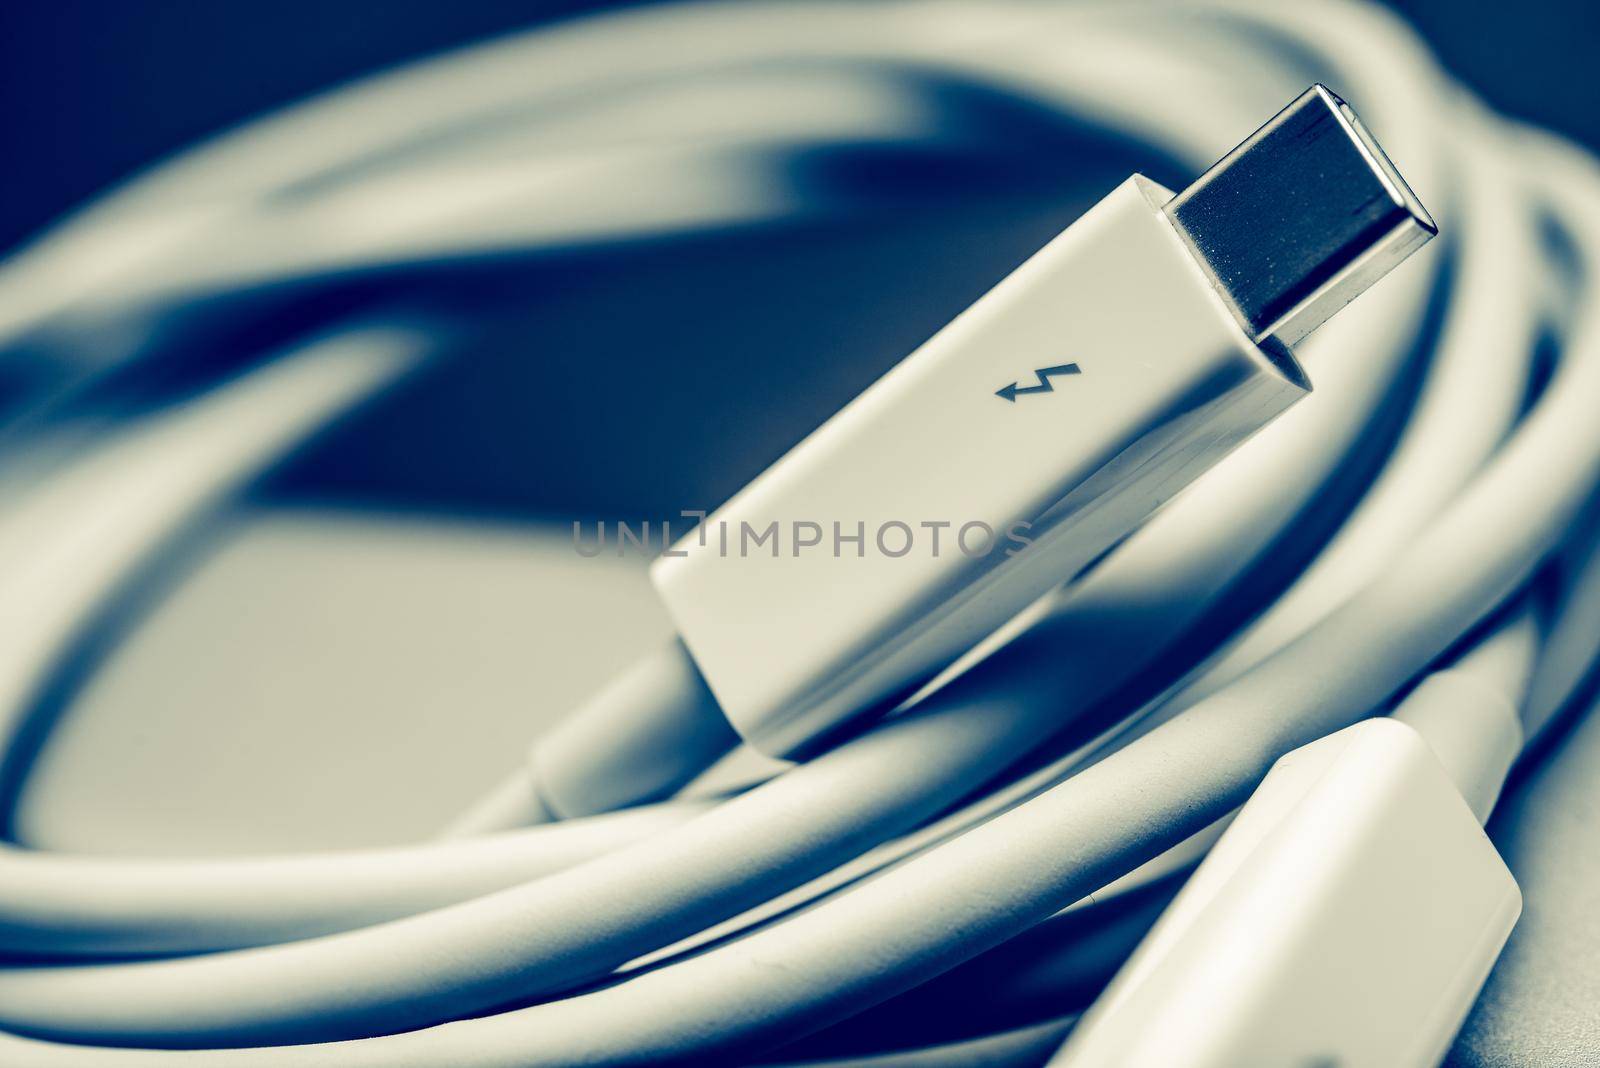 White Thunderbolt Cable Closeup Photo. Thunderbolt Data Transfer Cable. by welcomia